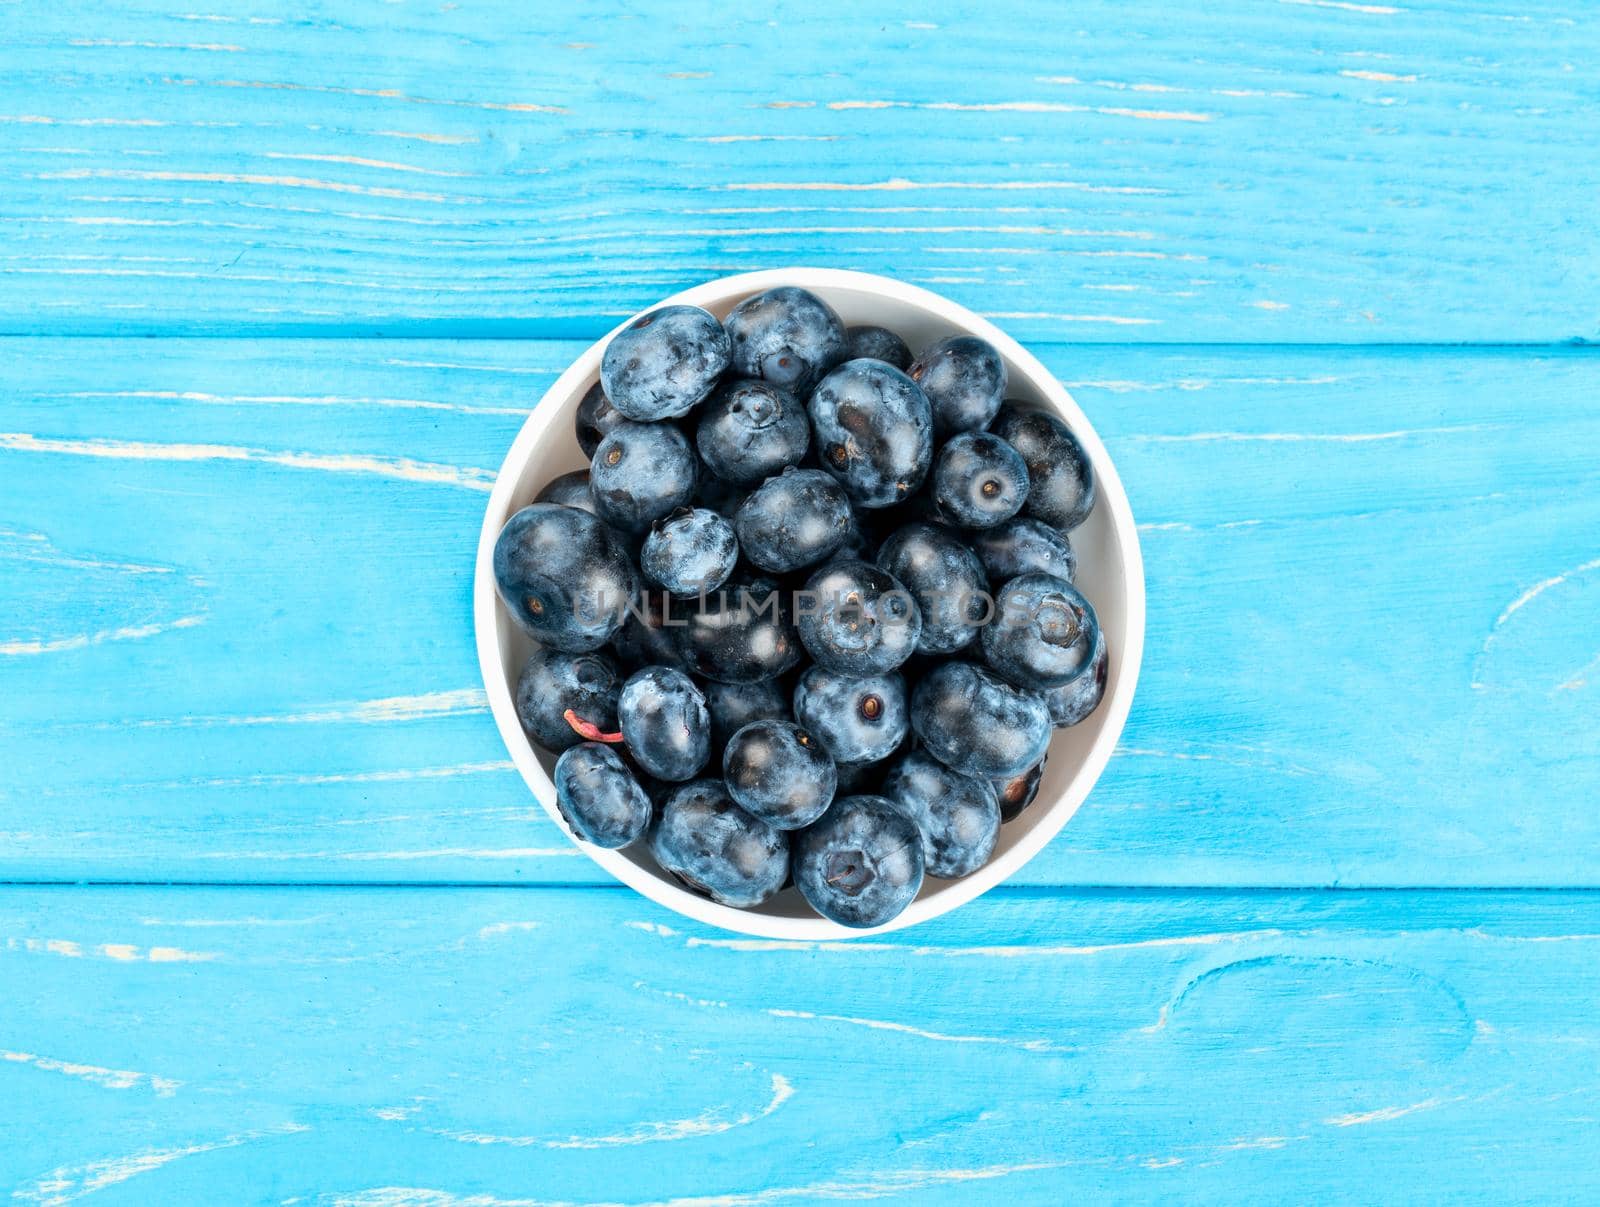 Ceramic bowl full of fresh blueberries on a wooden background, top view